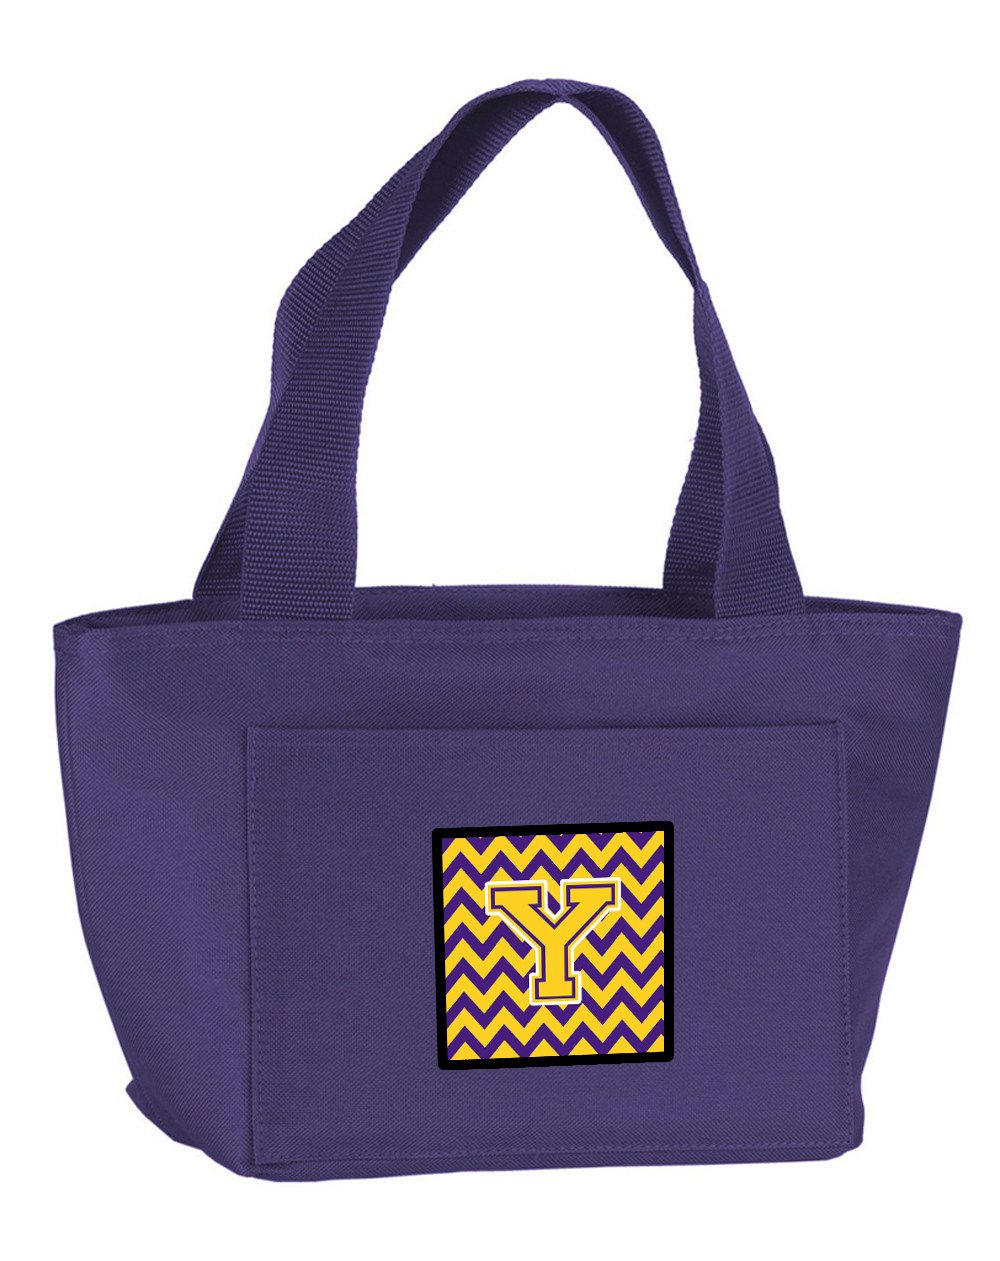 Letter Y Chevron Purple and Gold Lunch Bag CJ1041-YPR-8808 by Caroline's Treasures